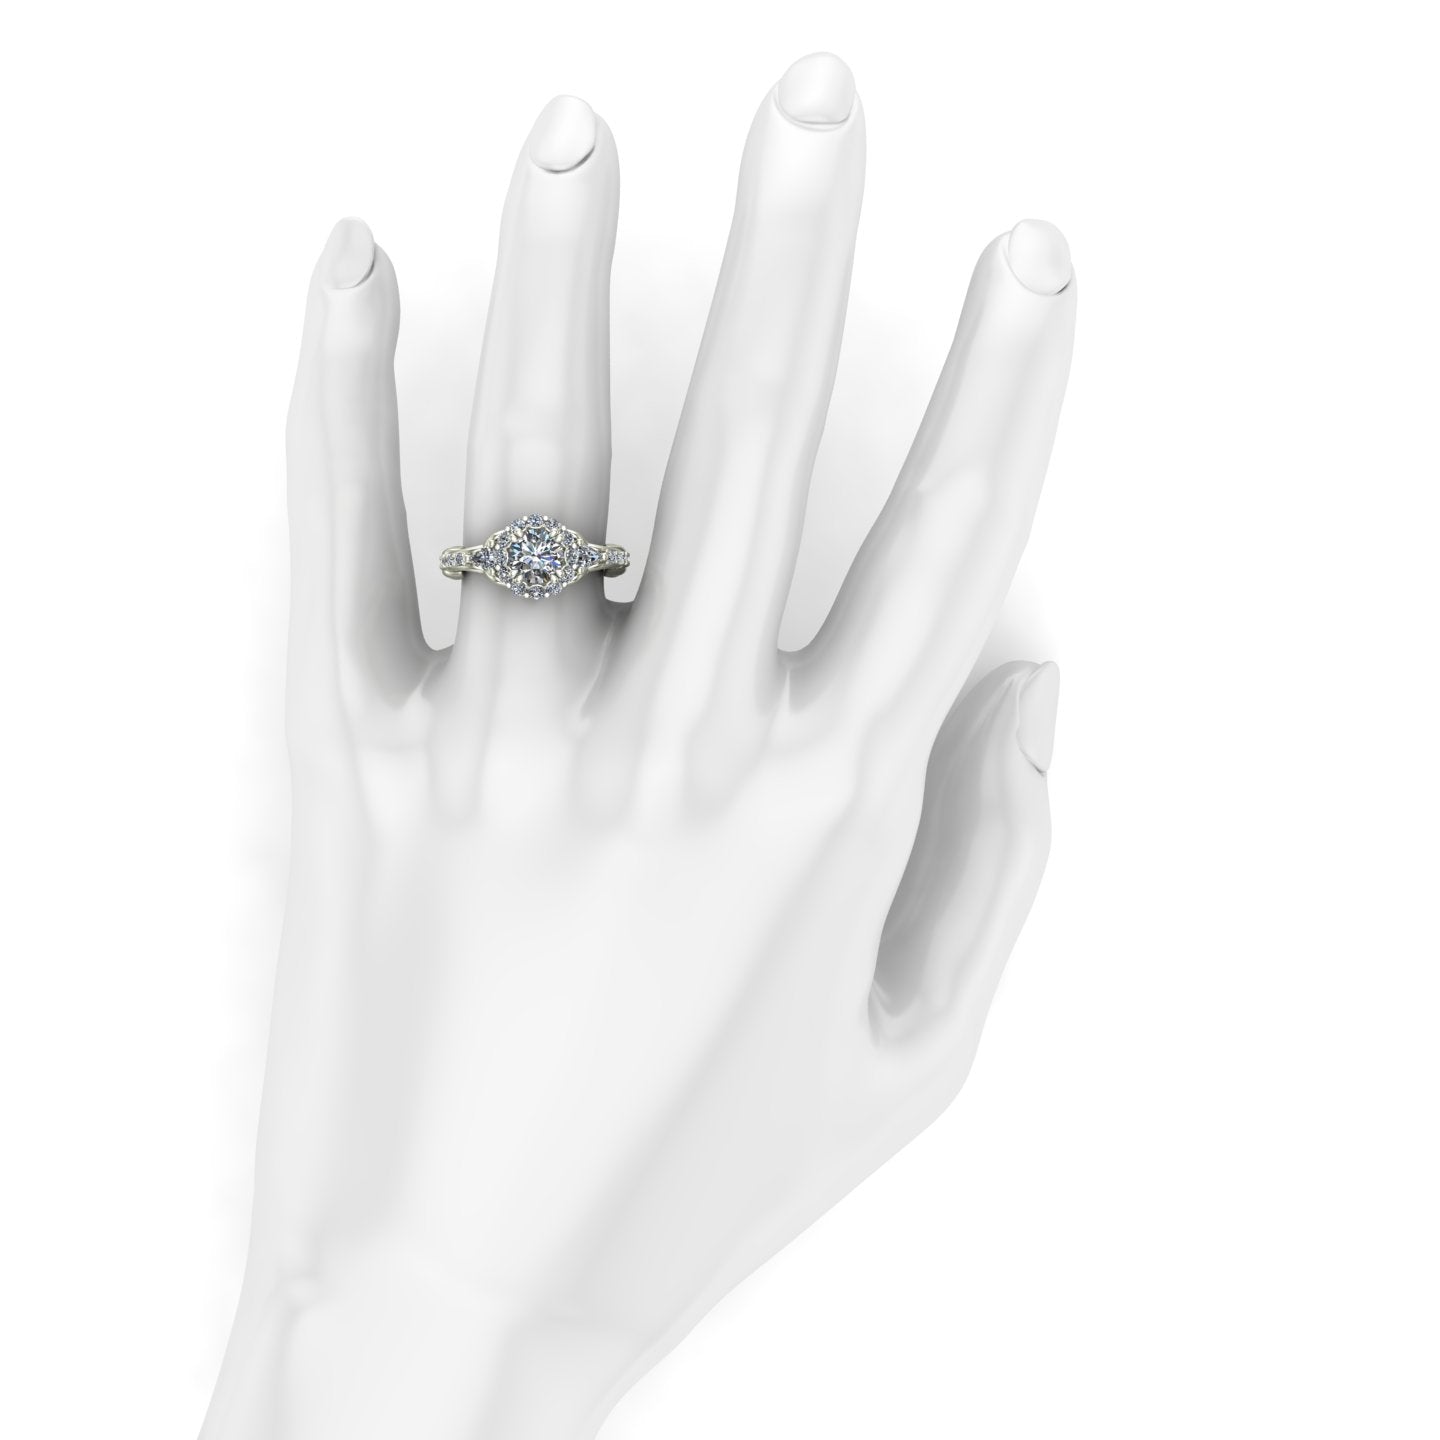 1ct diamond halo engagement ring with trillions and vines in 14k white gold - Charles Babb Designs - on hand